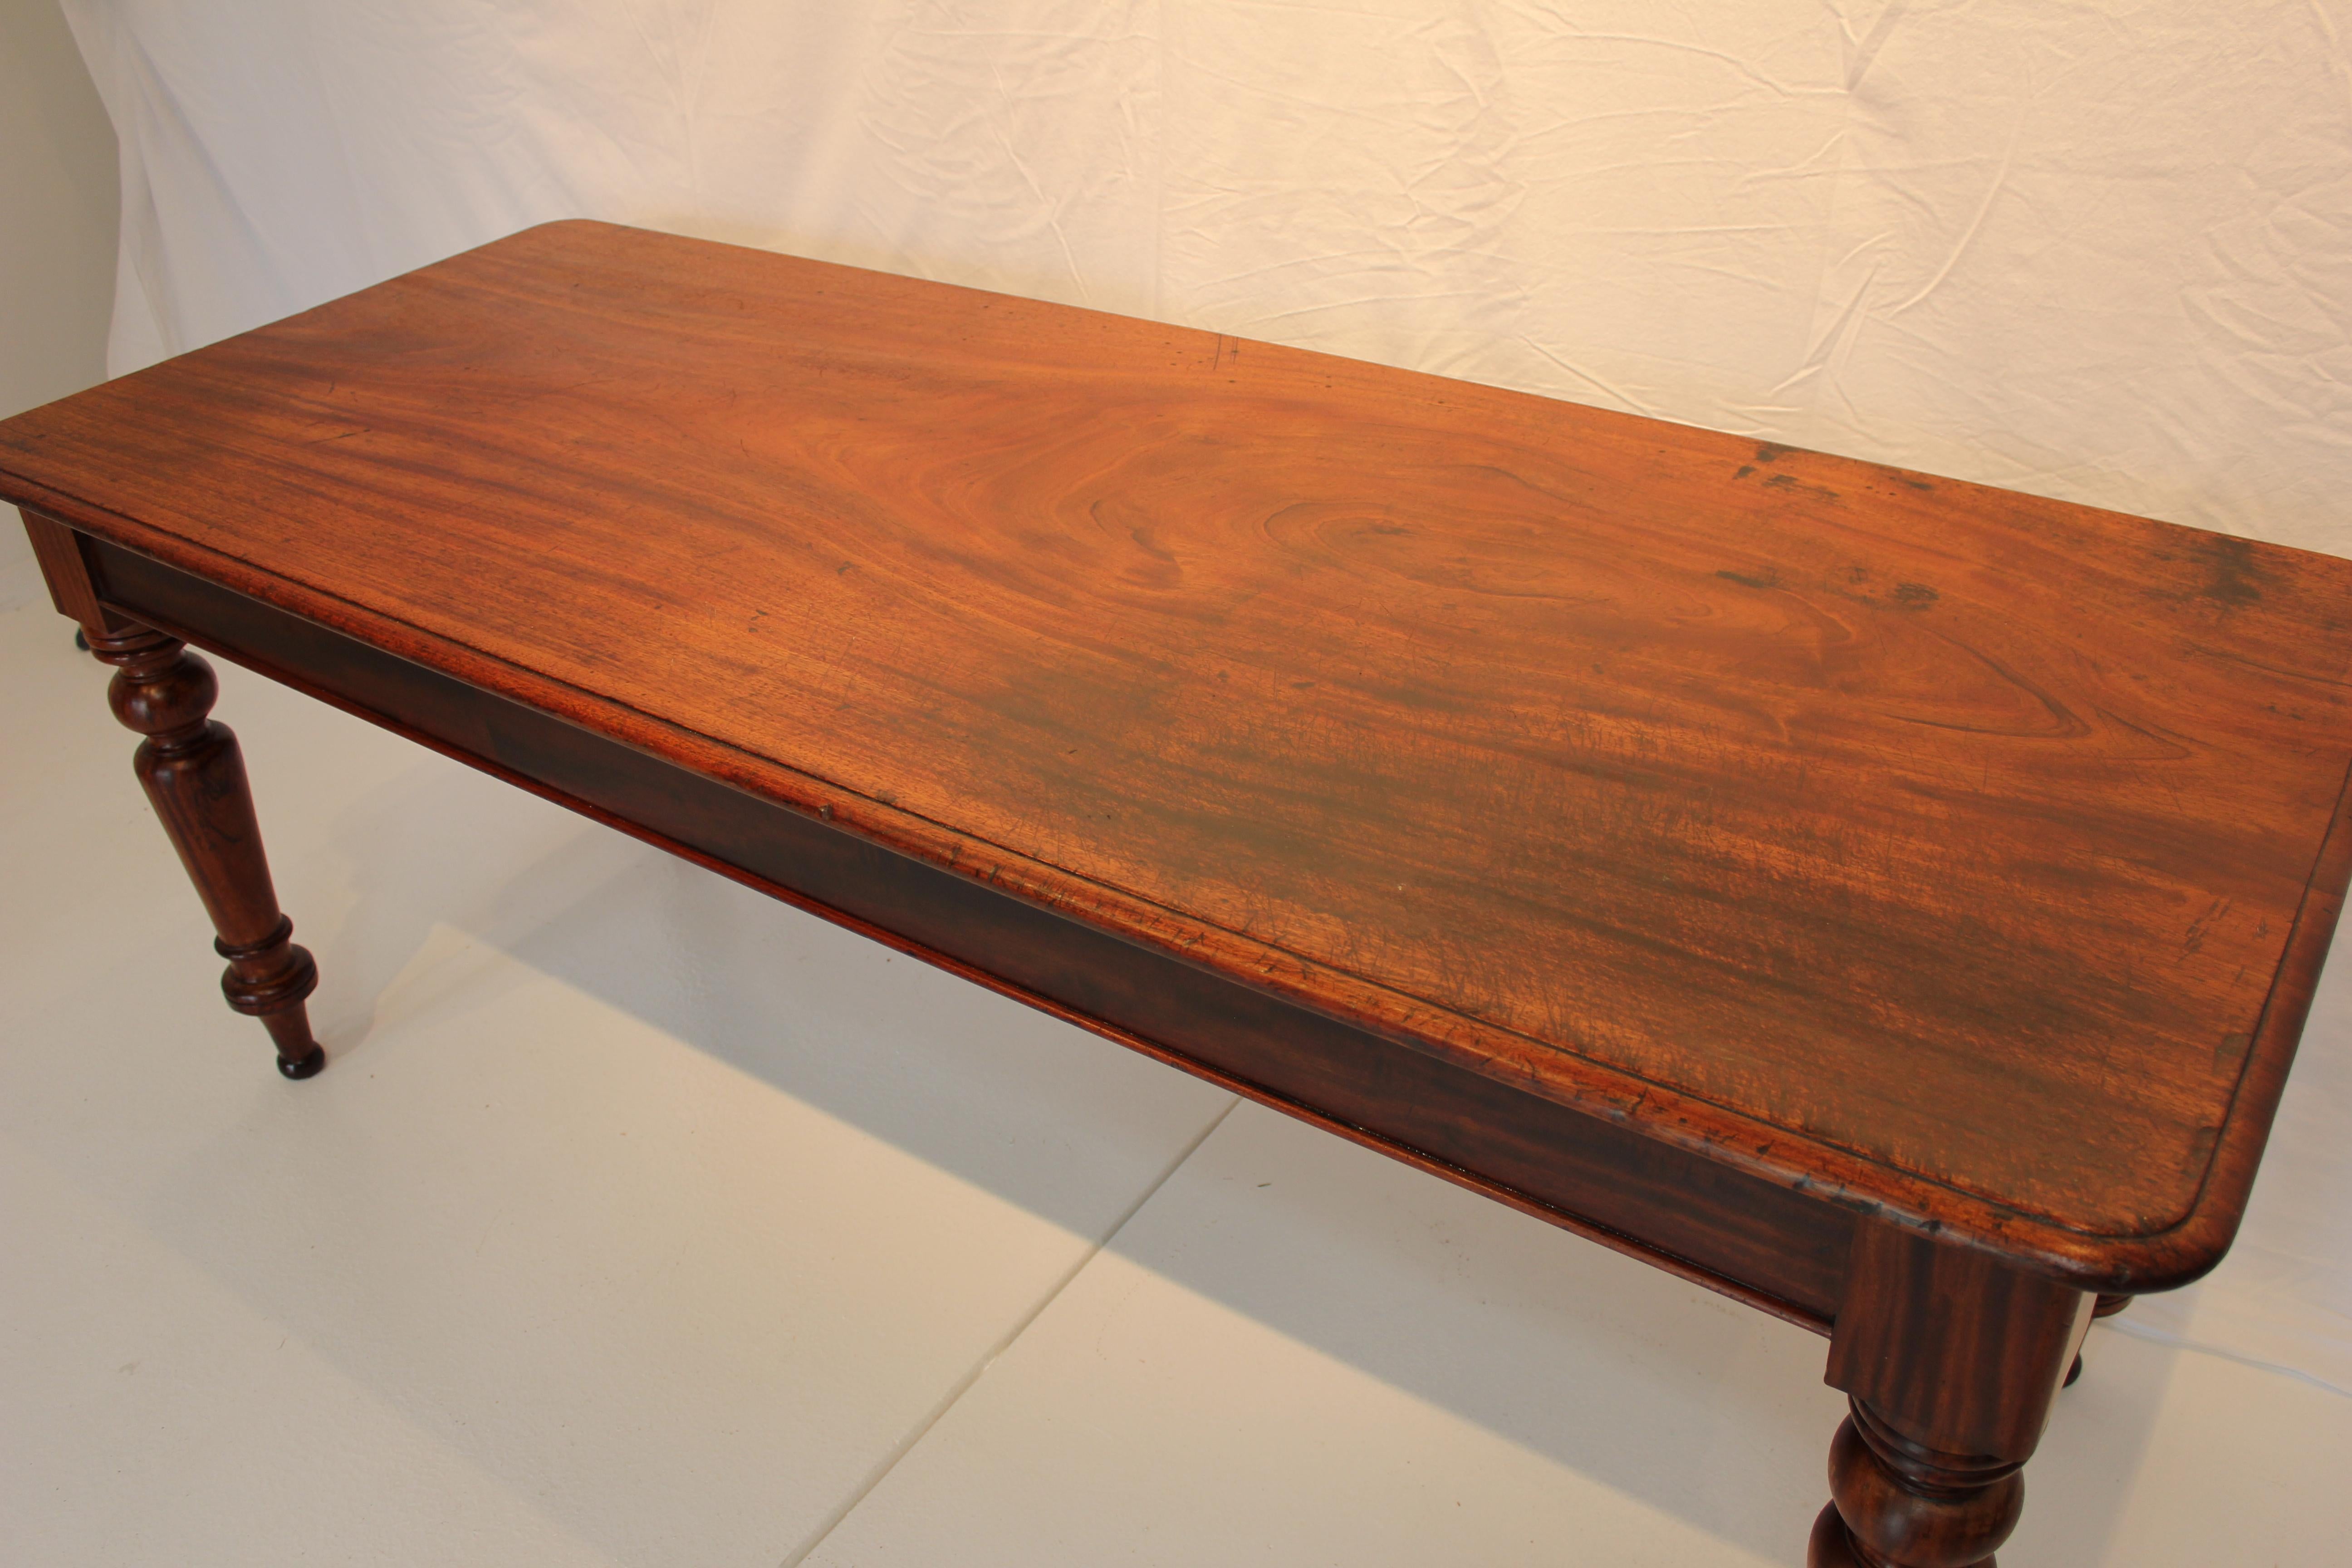 Hand-Crafted Antique American Mahogany Kitchen Dining Table 1 Plank Top Late 19th Century For Sale